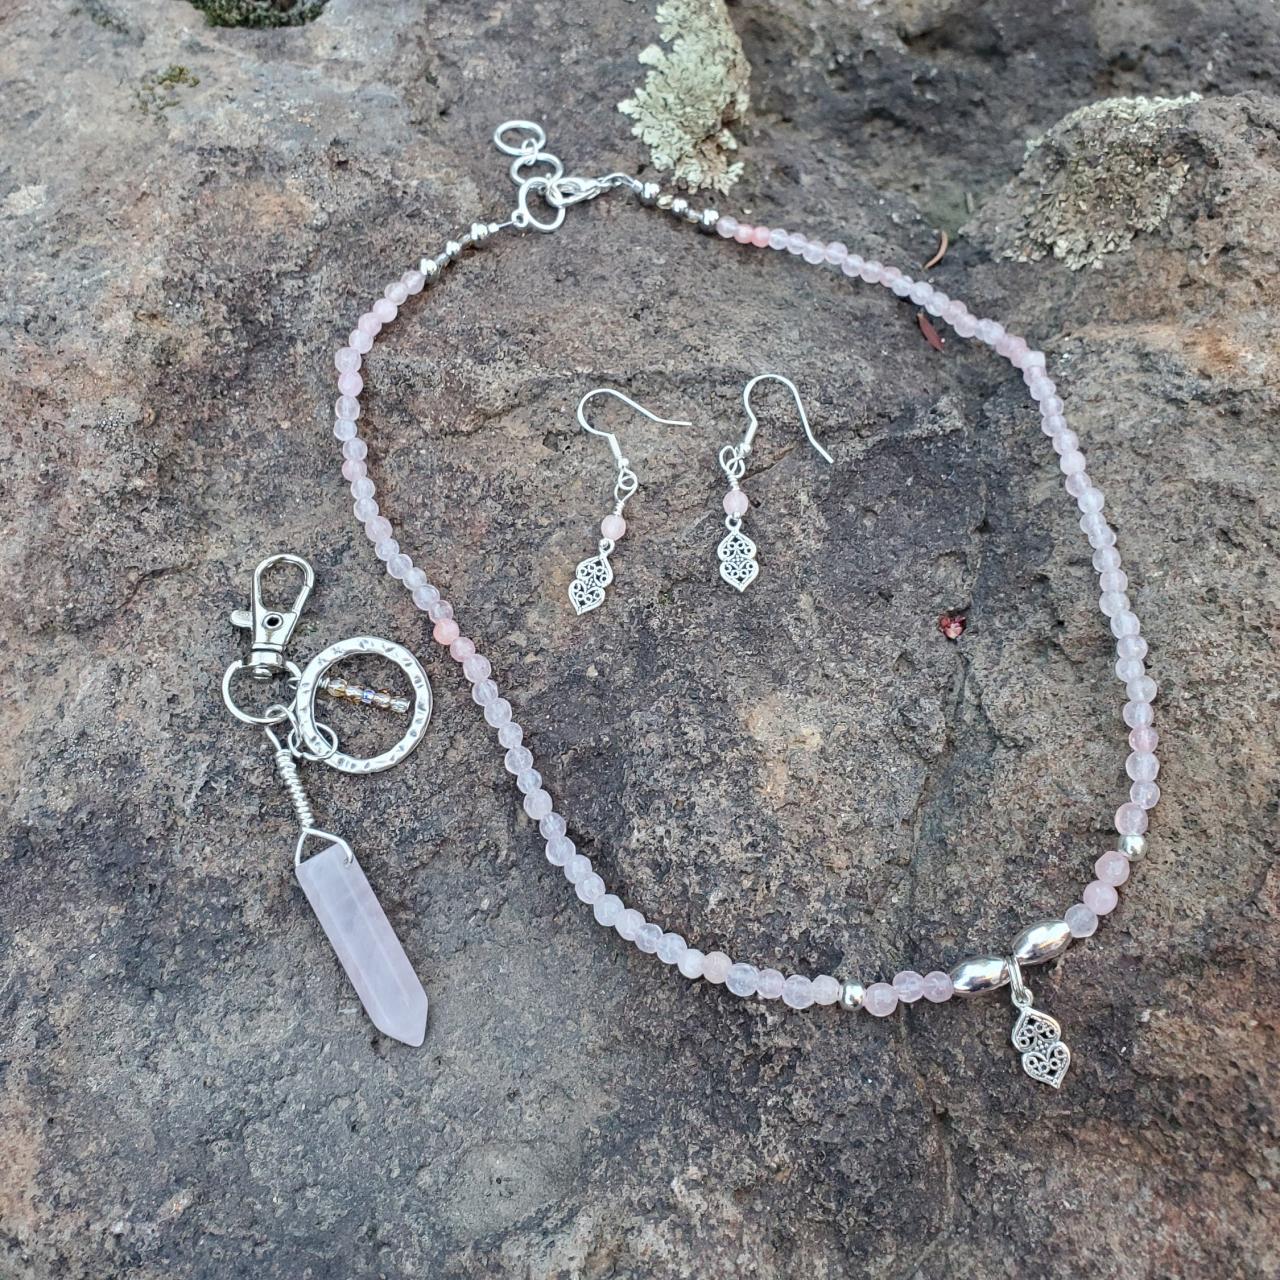 Rose Quartz Natural Healing Gemstone Necklace And Keychain Set With All Sterling Silver Charms And Beads